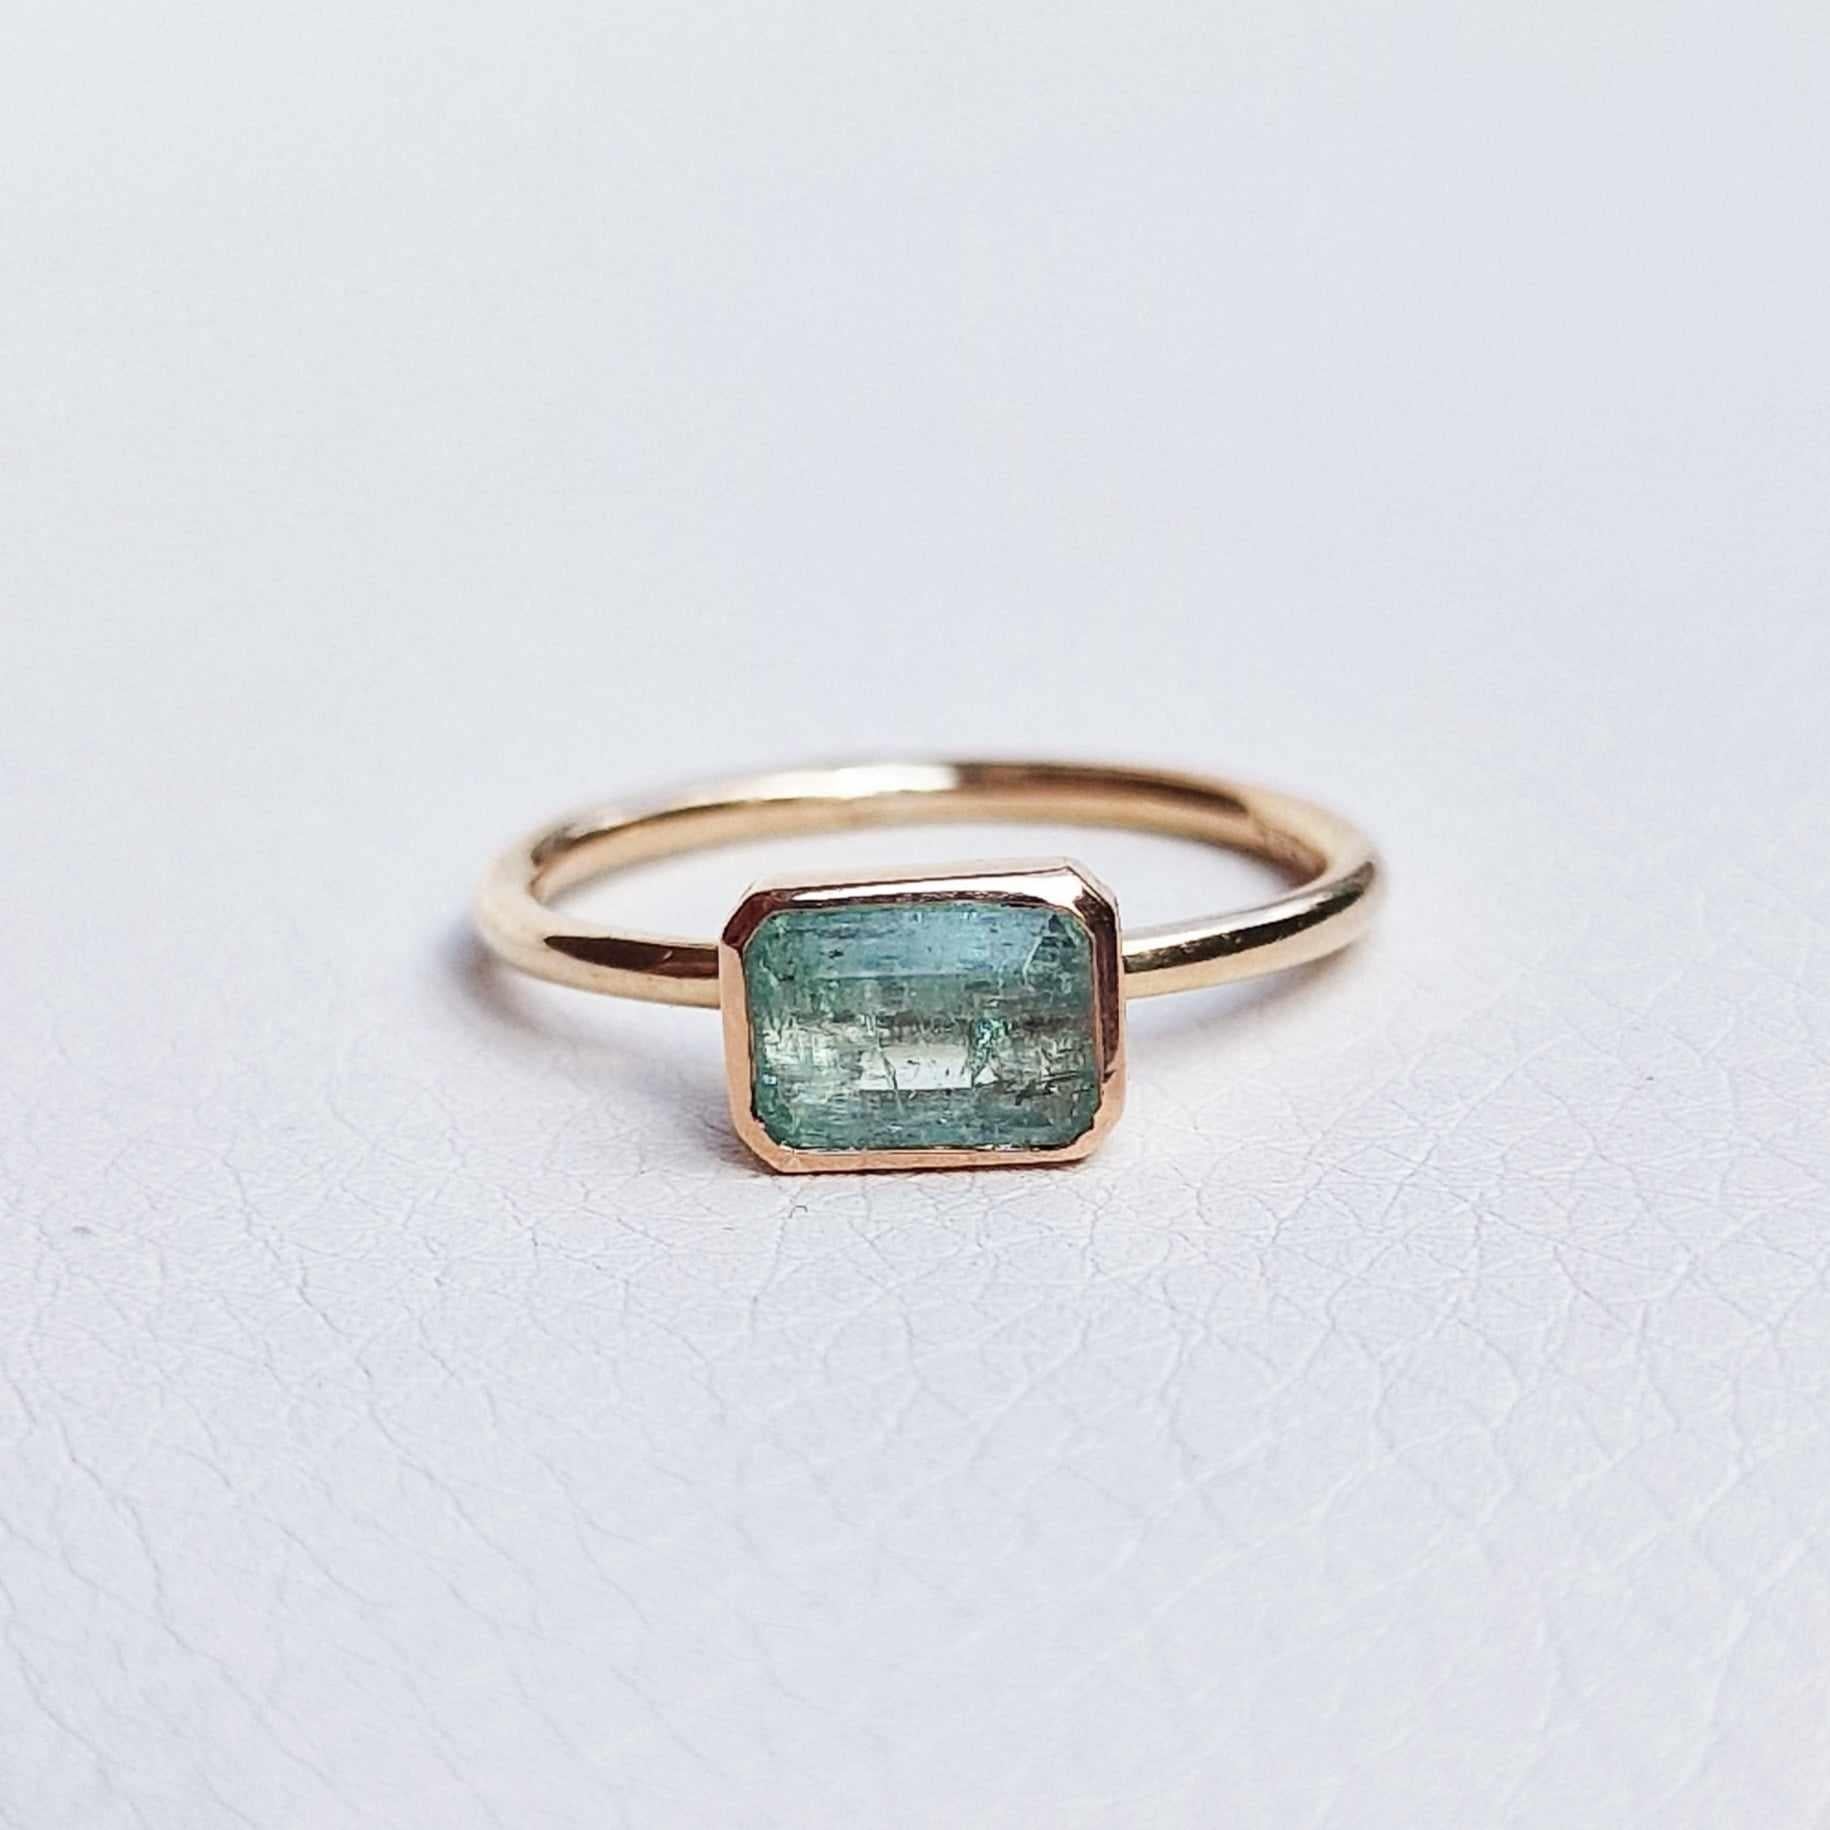 A beautiful and classic electric emerald ring in solid peach-yellow gold. The ring could be an original choice for an engagement and will be especially loved by women who appreciate colored gemstones. 

Ring is available in size 53 / 6.5 / M1/2 and